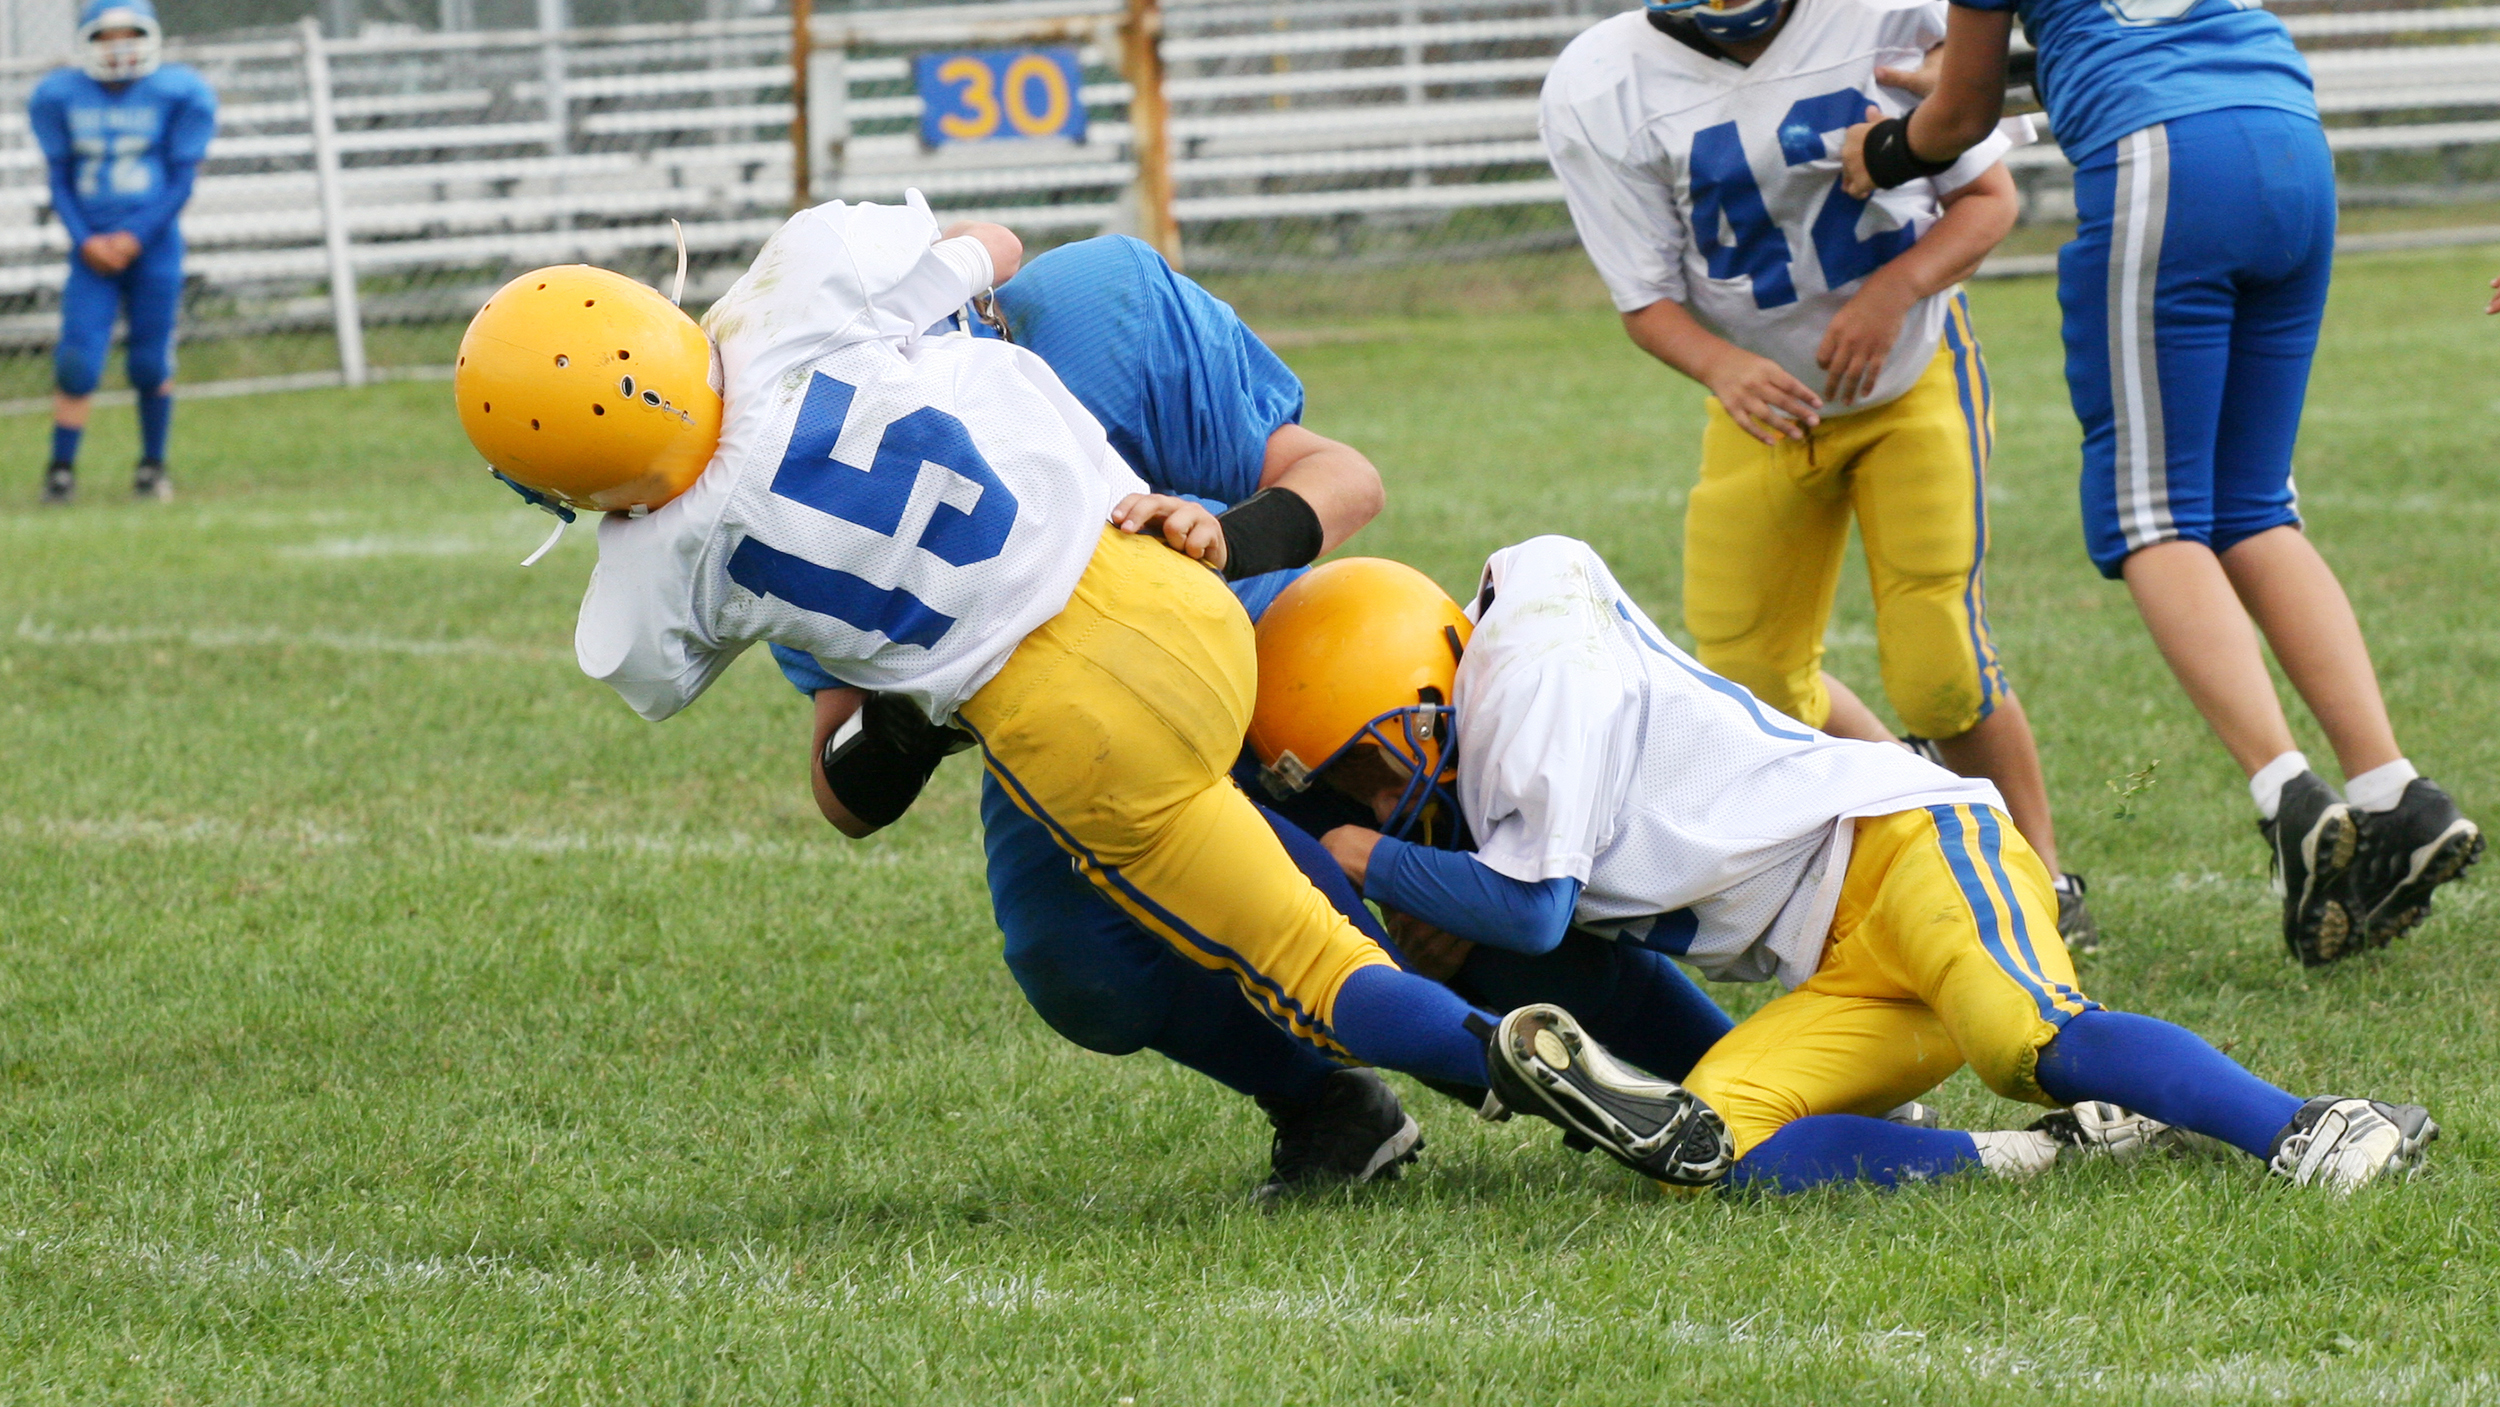 Concussion' doctor warns against contact sports for kids